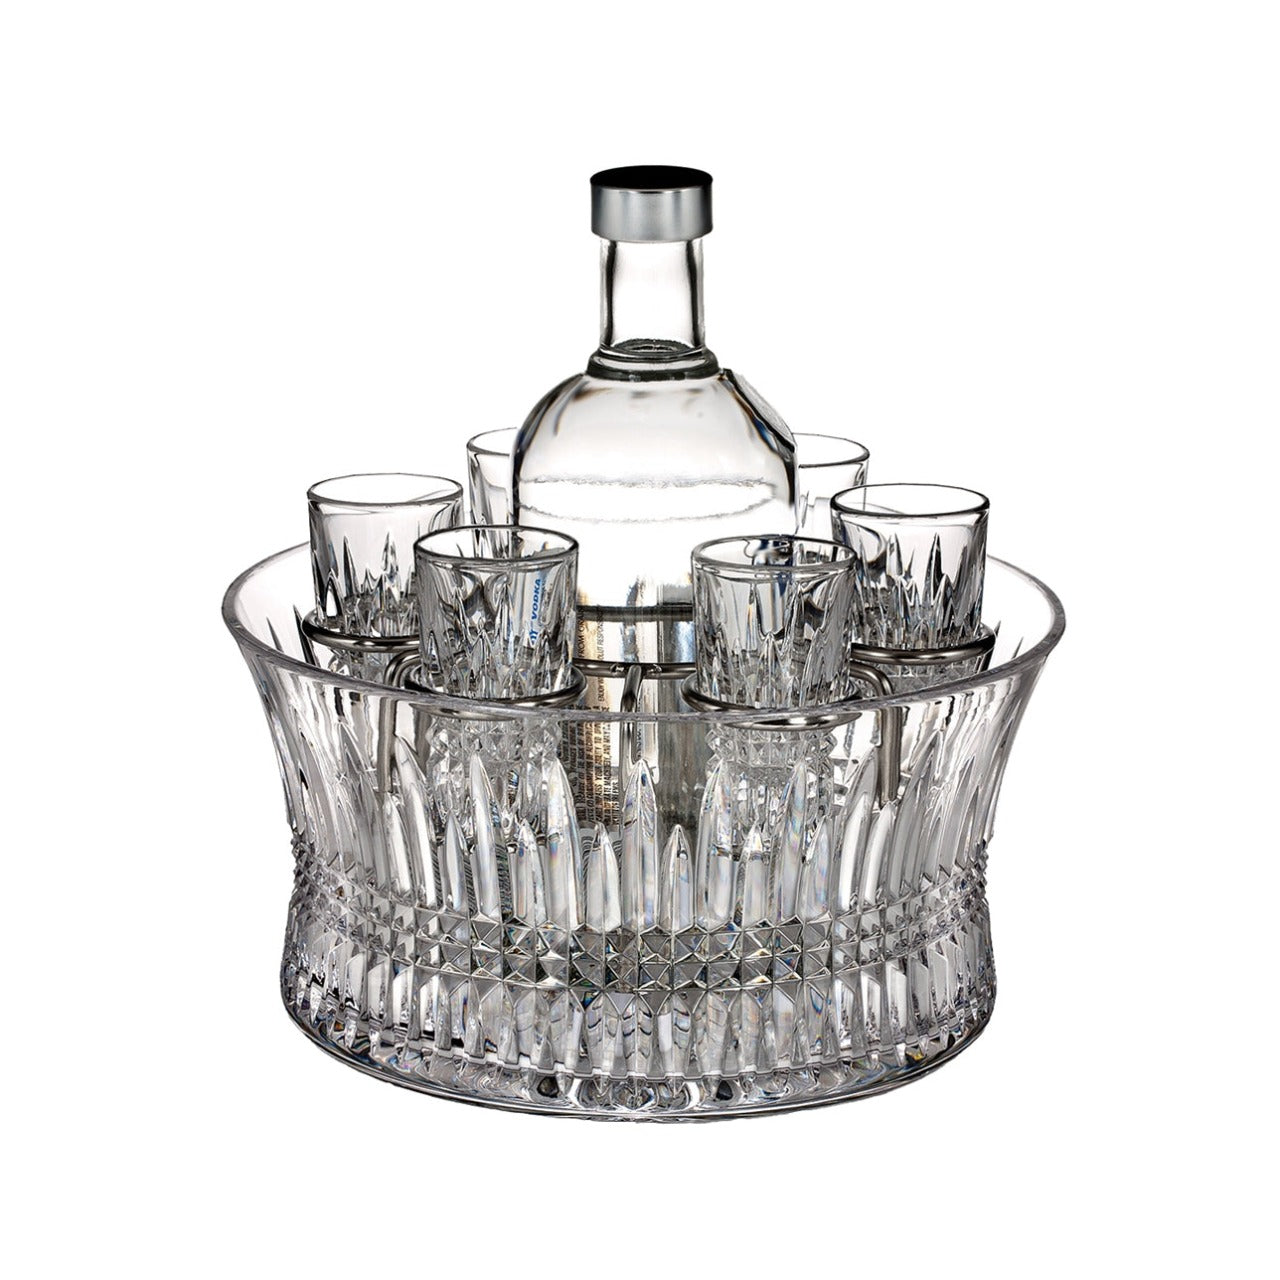 Waterford Crystal Lismore Diamond 7 Pce Vodka Set with Chill Bowl  The Lismore Diamond pattern is a strikingly modern reinvention of the Waterford classic, characterised by intricate diamond cuts rendered in radiant fine crystal.